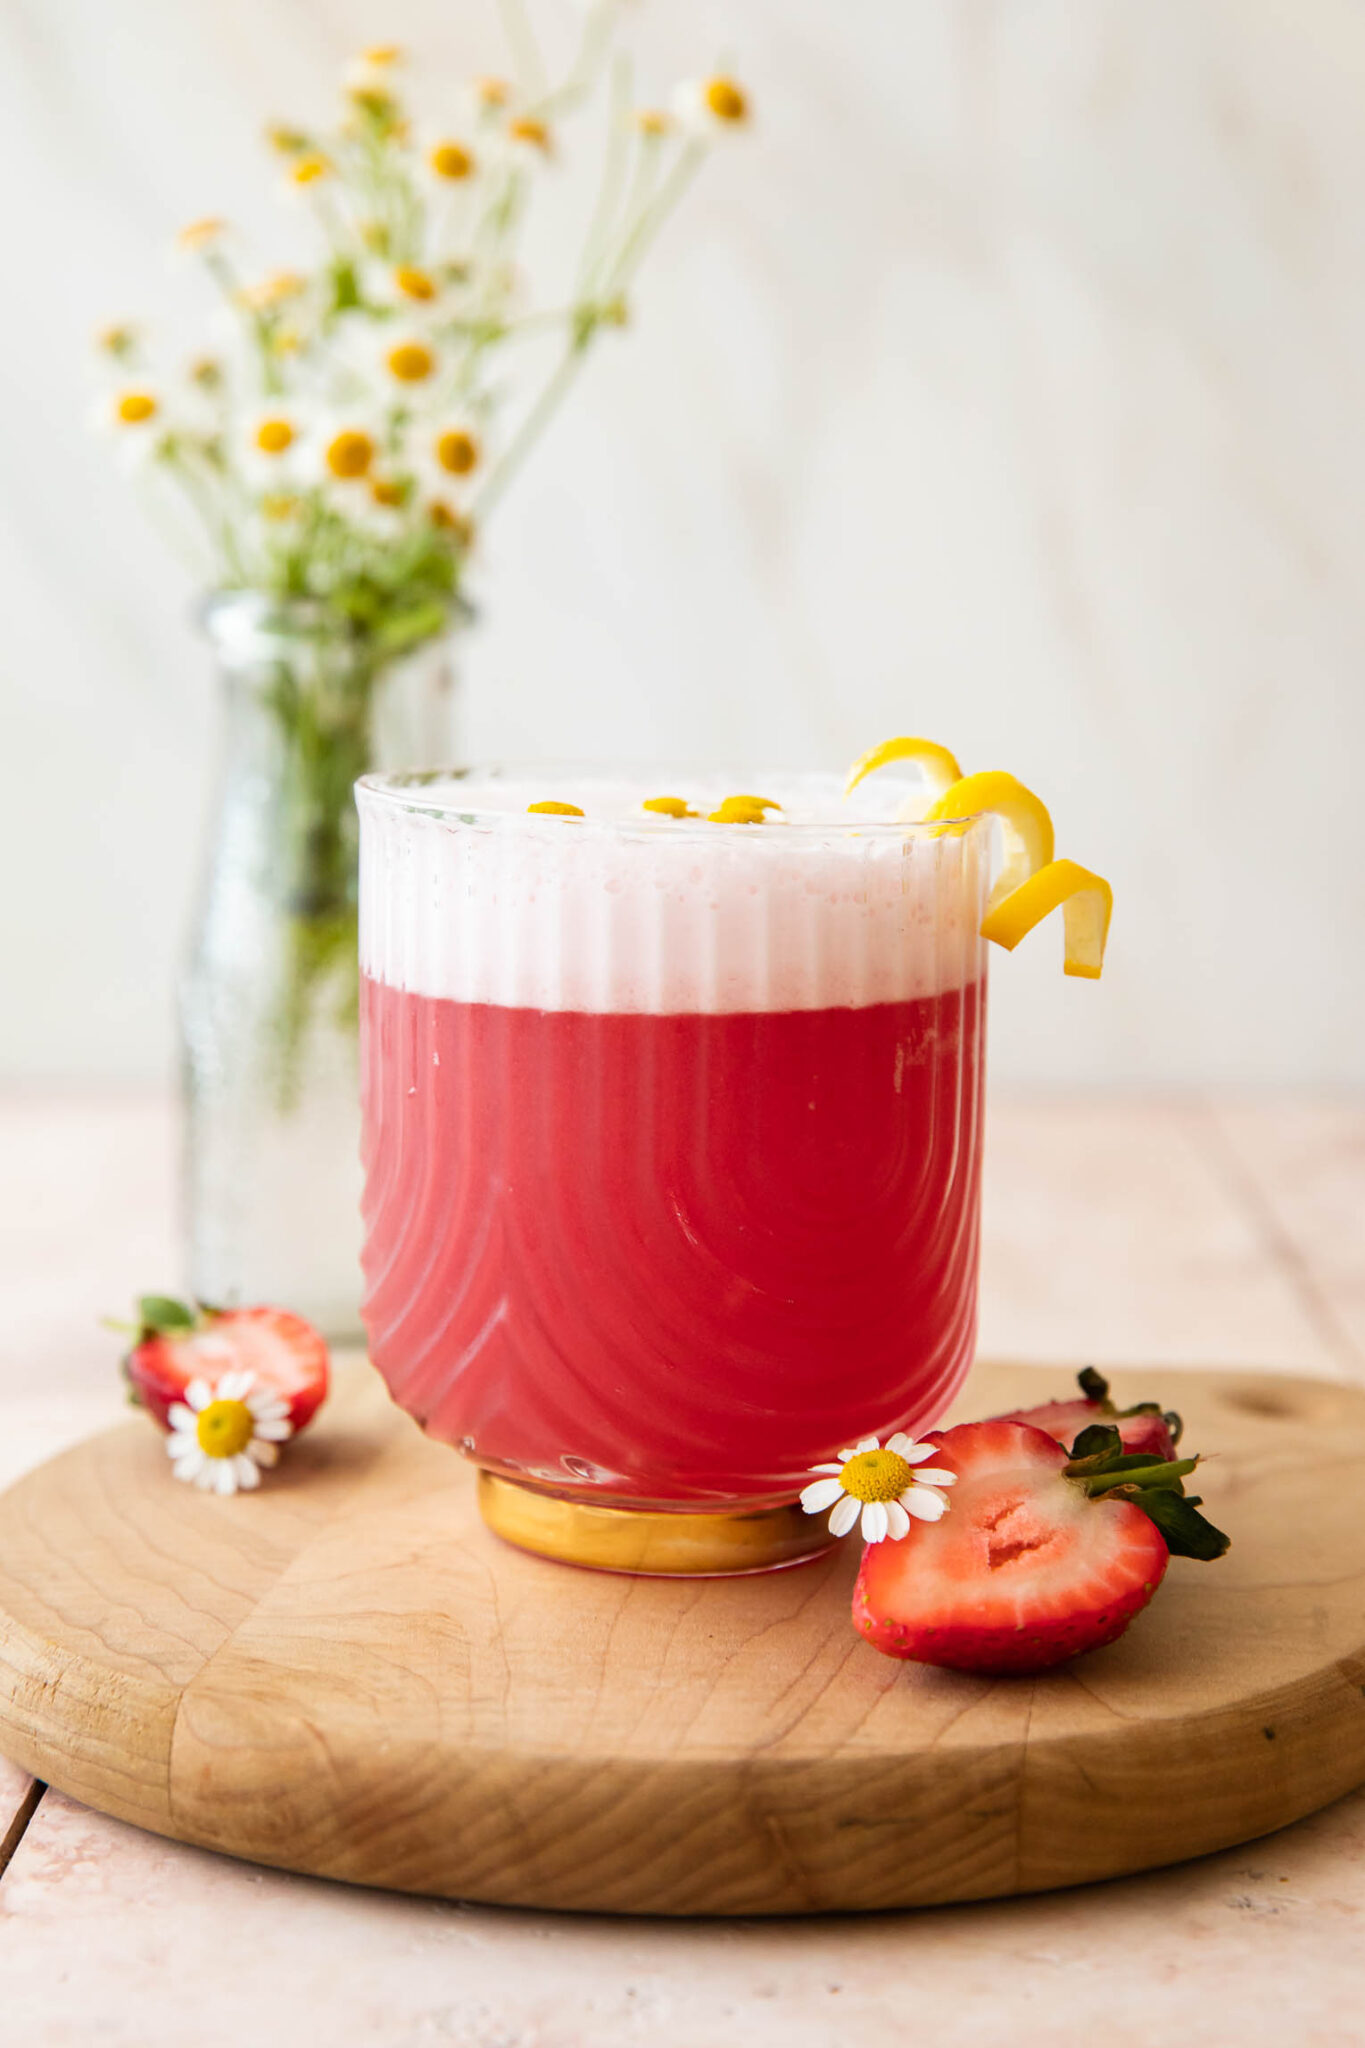 Pink gin sour with lemon garnish and strawberries